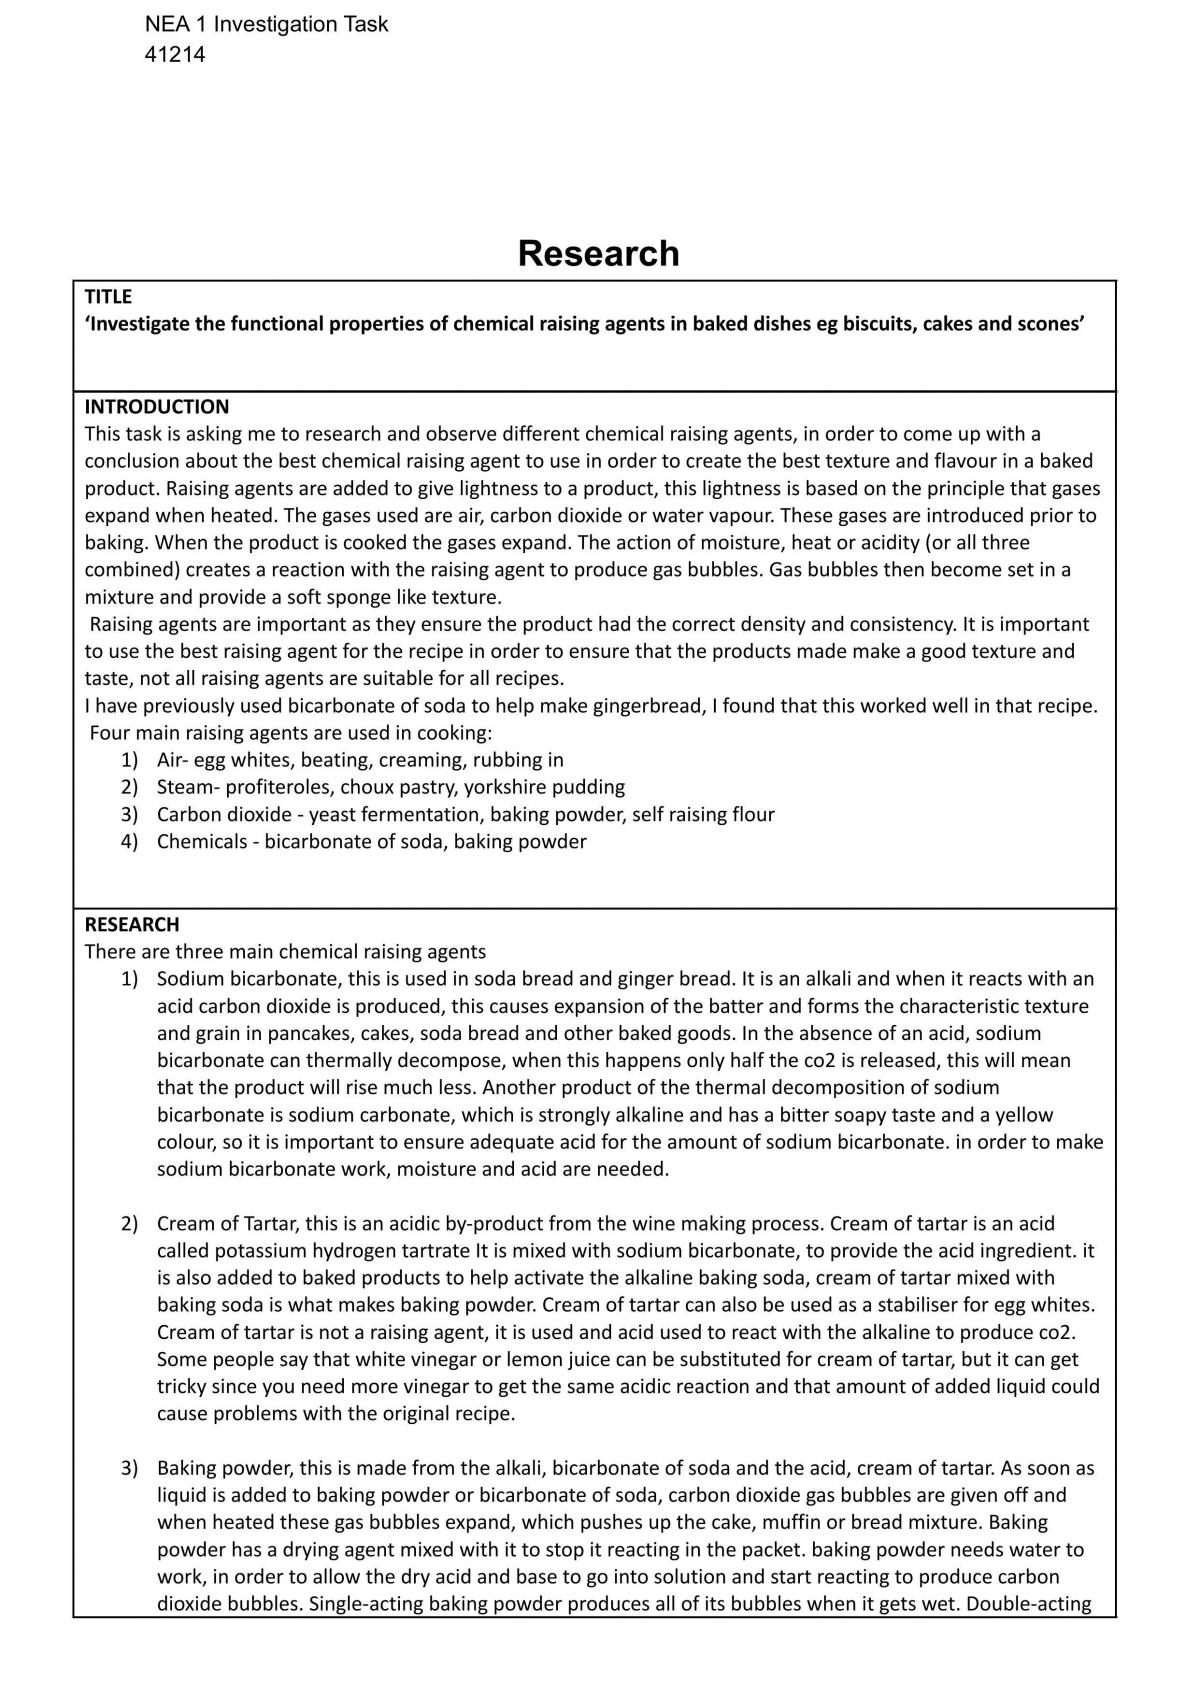 gcse food and nutrition coursework examples aqa